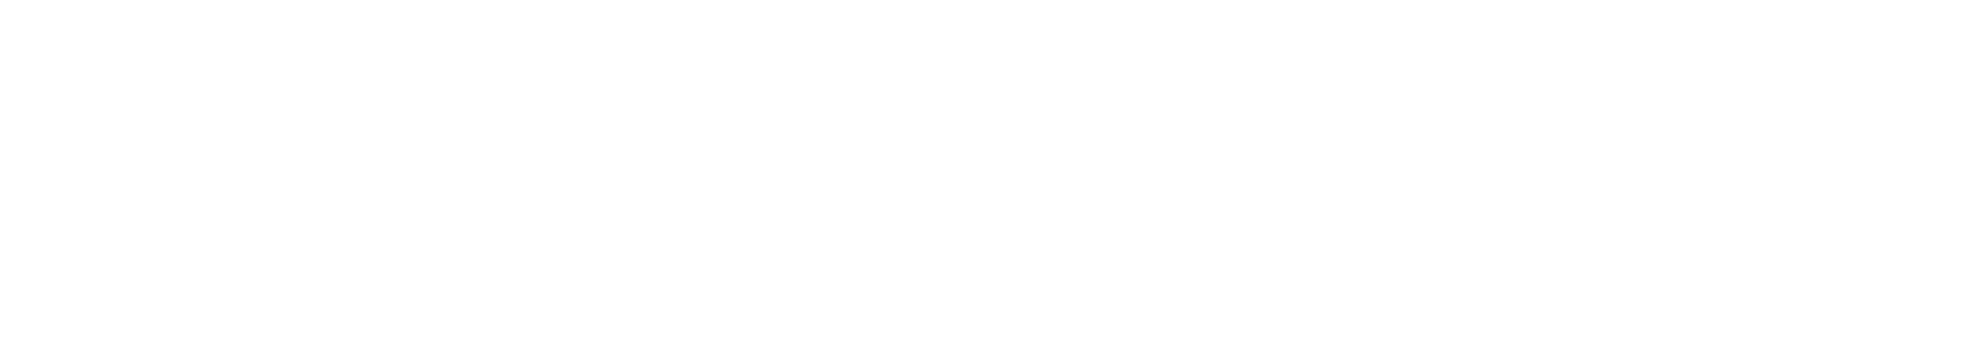 Therapeutic Neuroscience Research Group